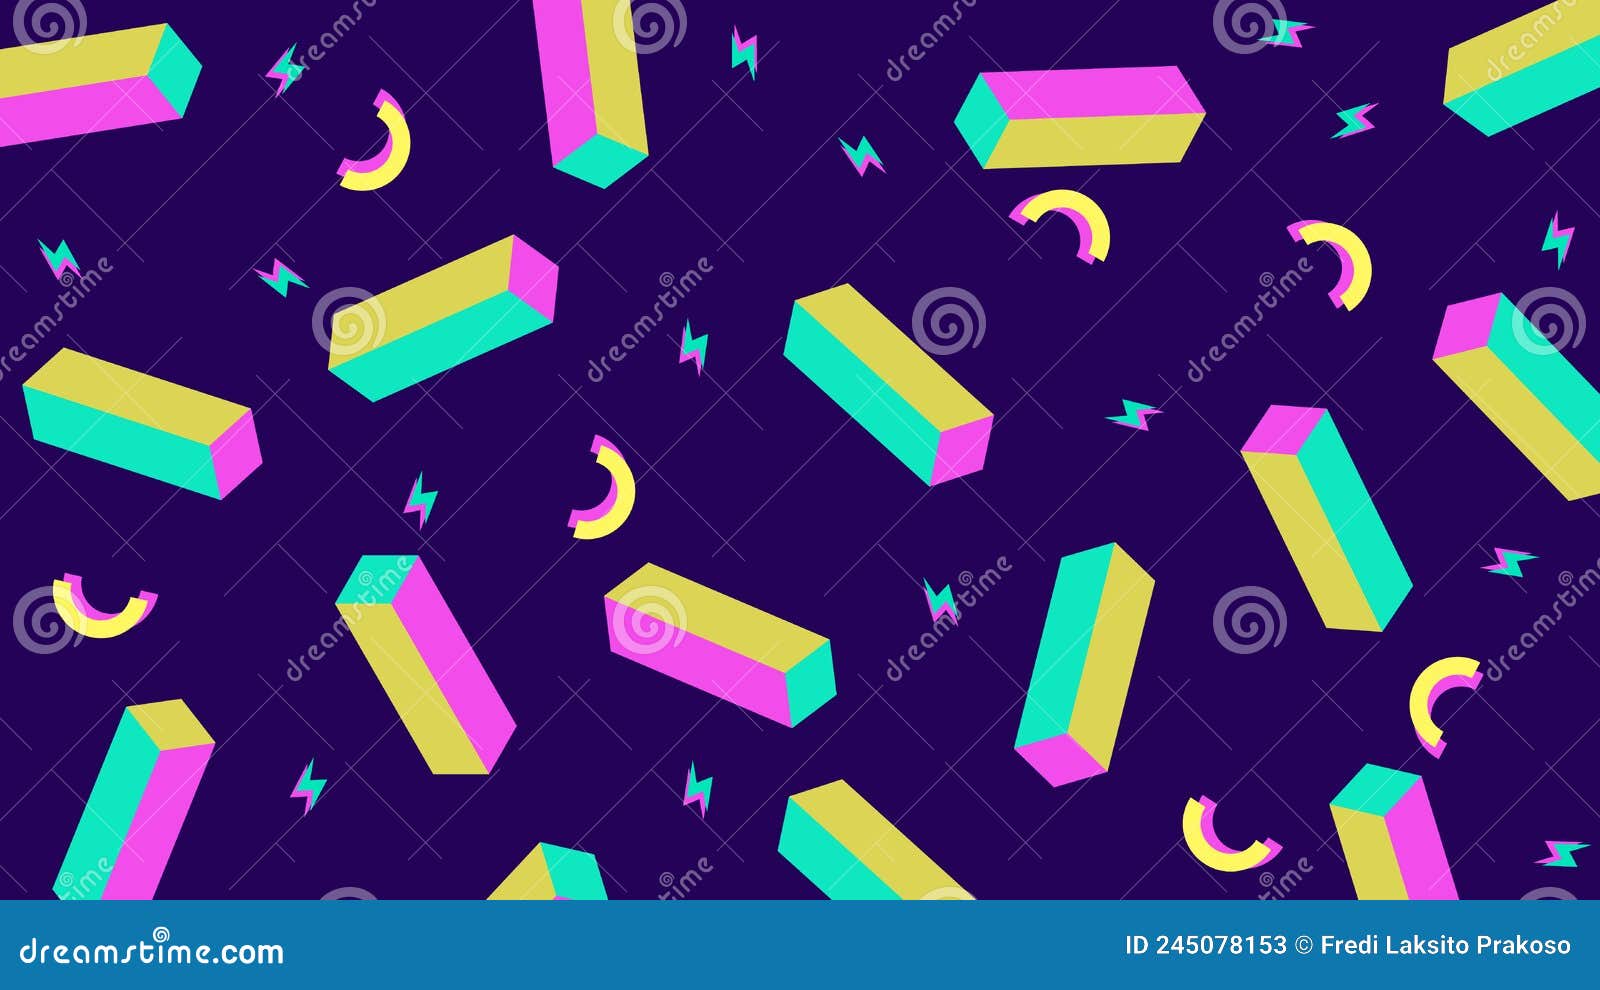 Aesthetic Fashion Background and Eighties Graphic. 90s and 80s Background  Template with Retro Style Textures and Abstract Shapes Stock Vector -  Illustration of banner, alphabet: 245078153